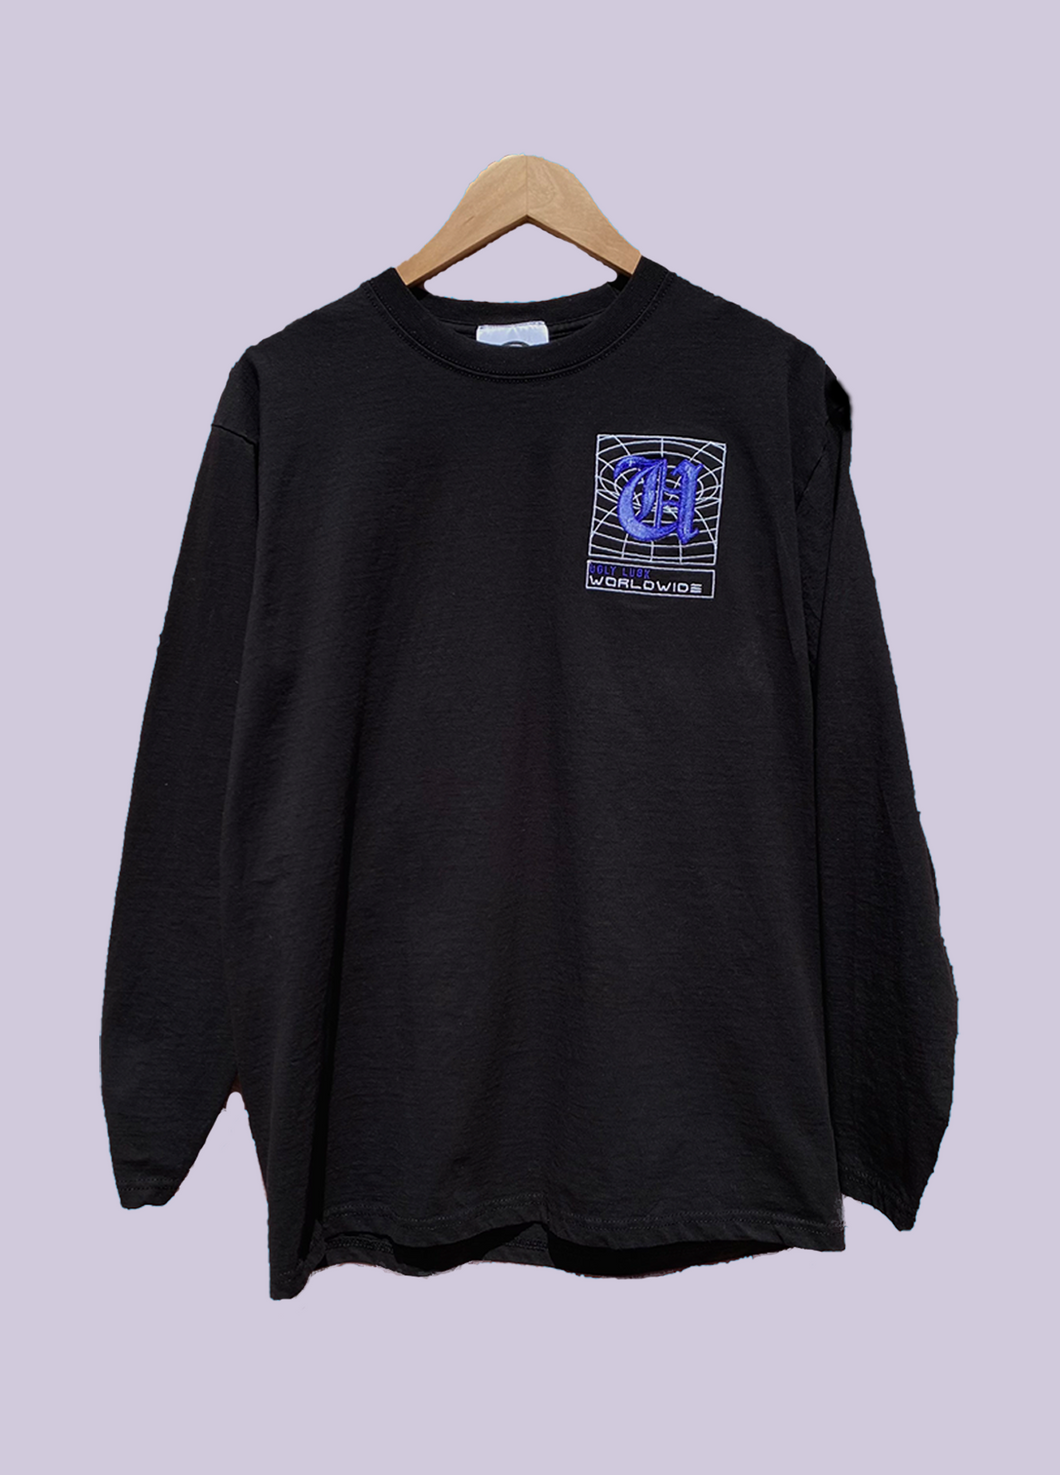 Ugly Luck Worldwide Embroidered Black Long sleeve